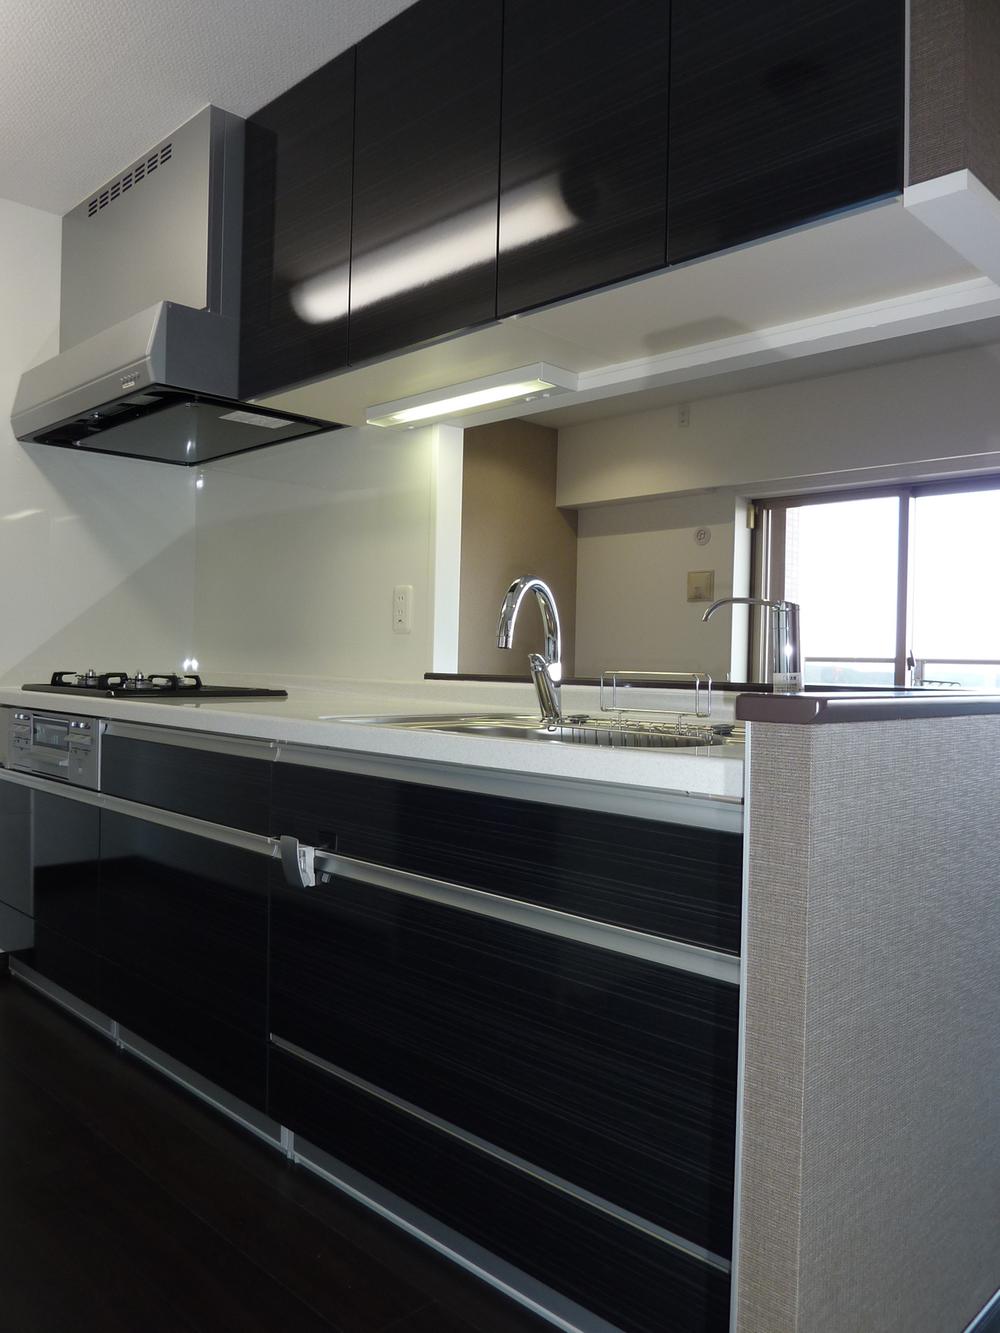 Kitchen. Kitchen exchange (slide storage, Human large top, Soft motion rail, Door pocket, Range hood: the same hourly rate discharge type), Replace the kitchen base light to LED2 lamp type